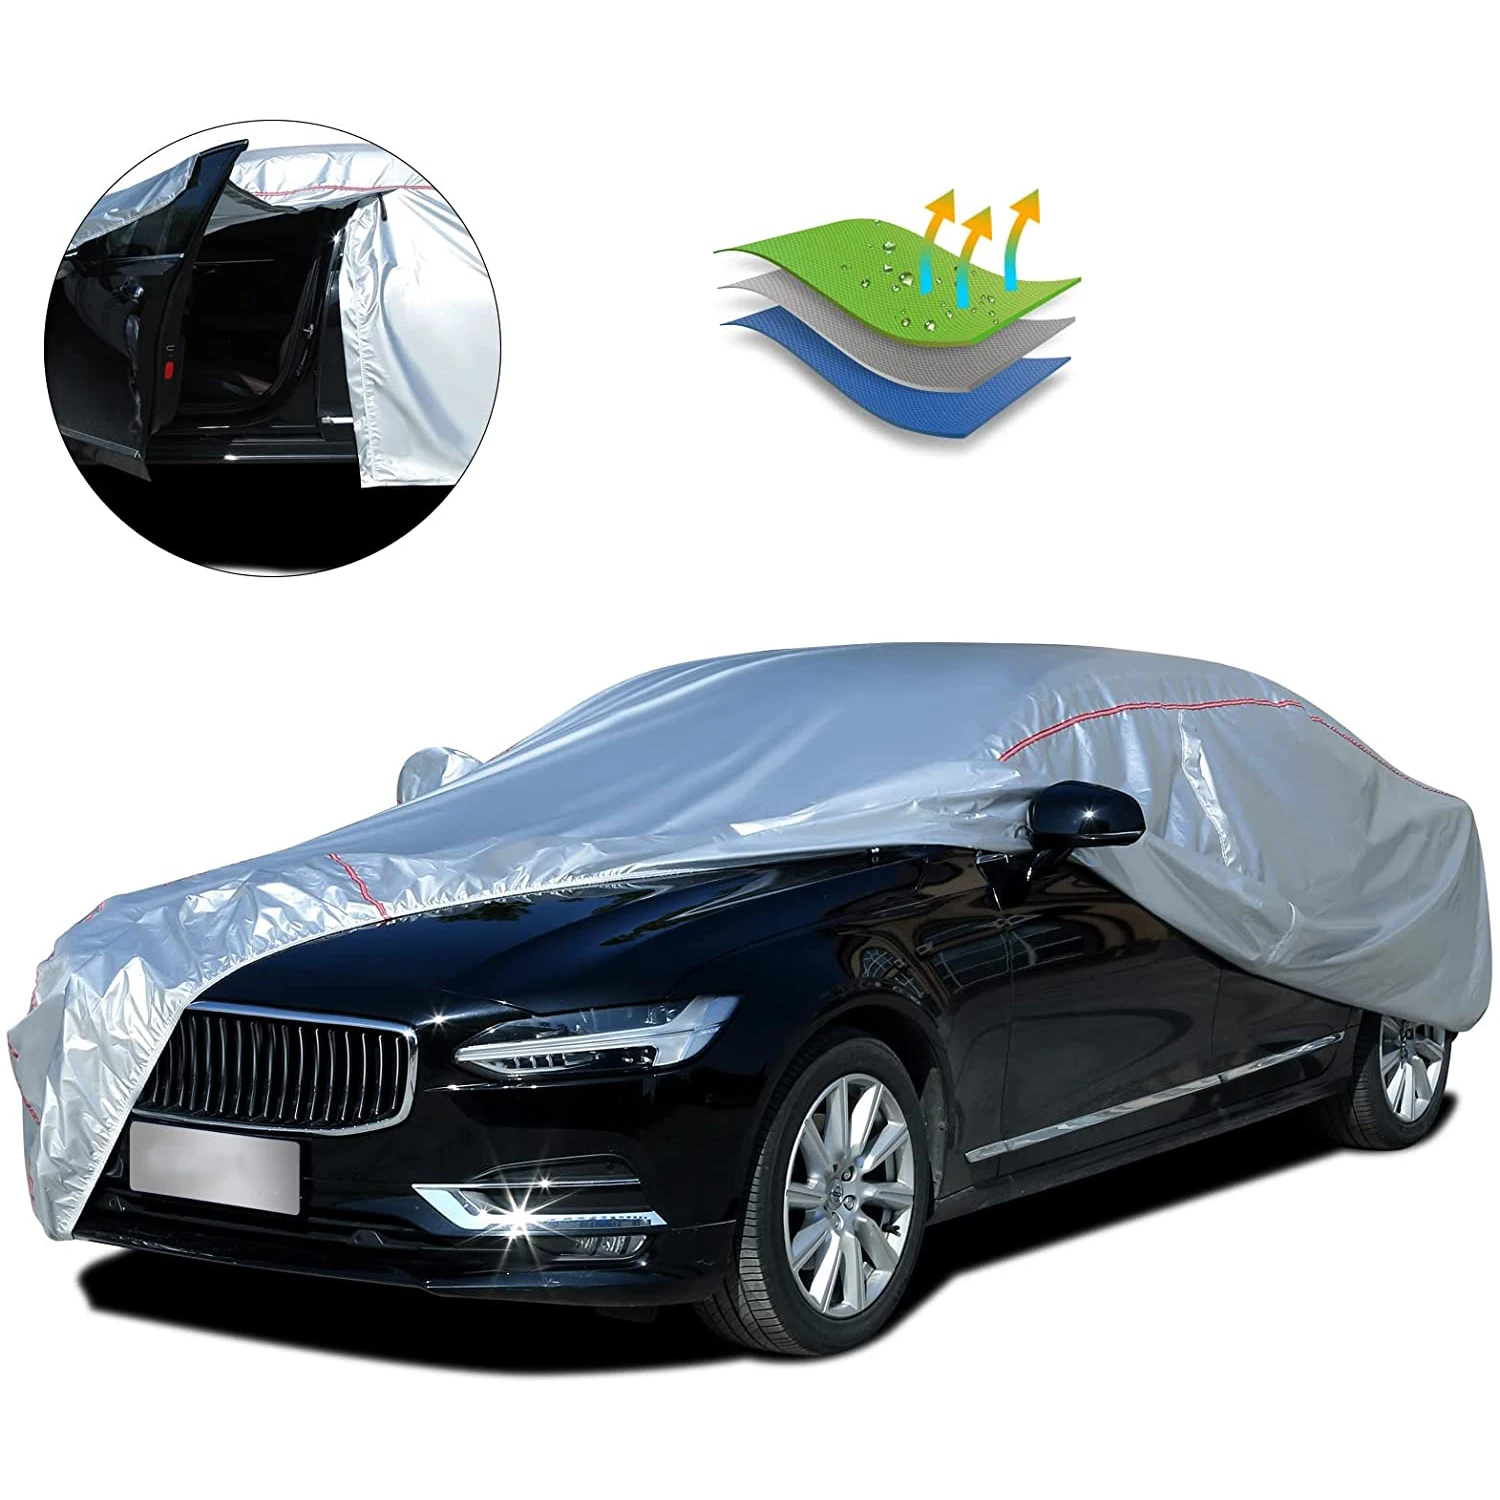 

190T Universal Car Covers Outdoor Sun Protection Dustproof Rainproof Snow Protection For Mitsubishi Outlander Pajero Lancer